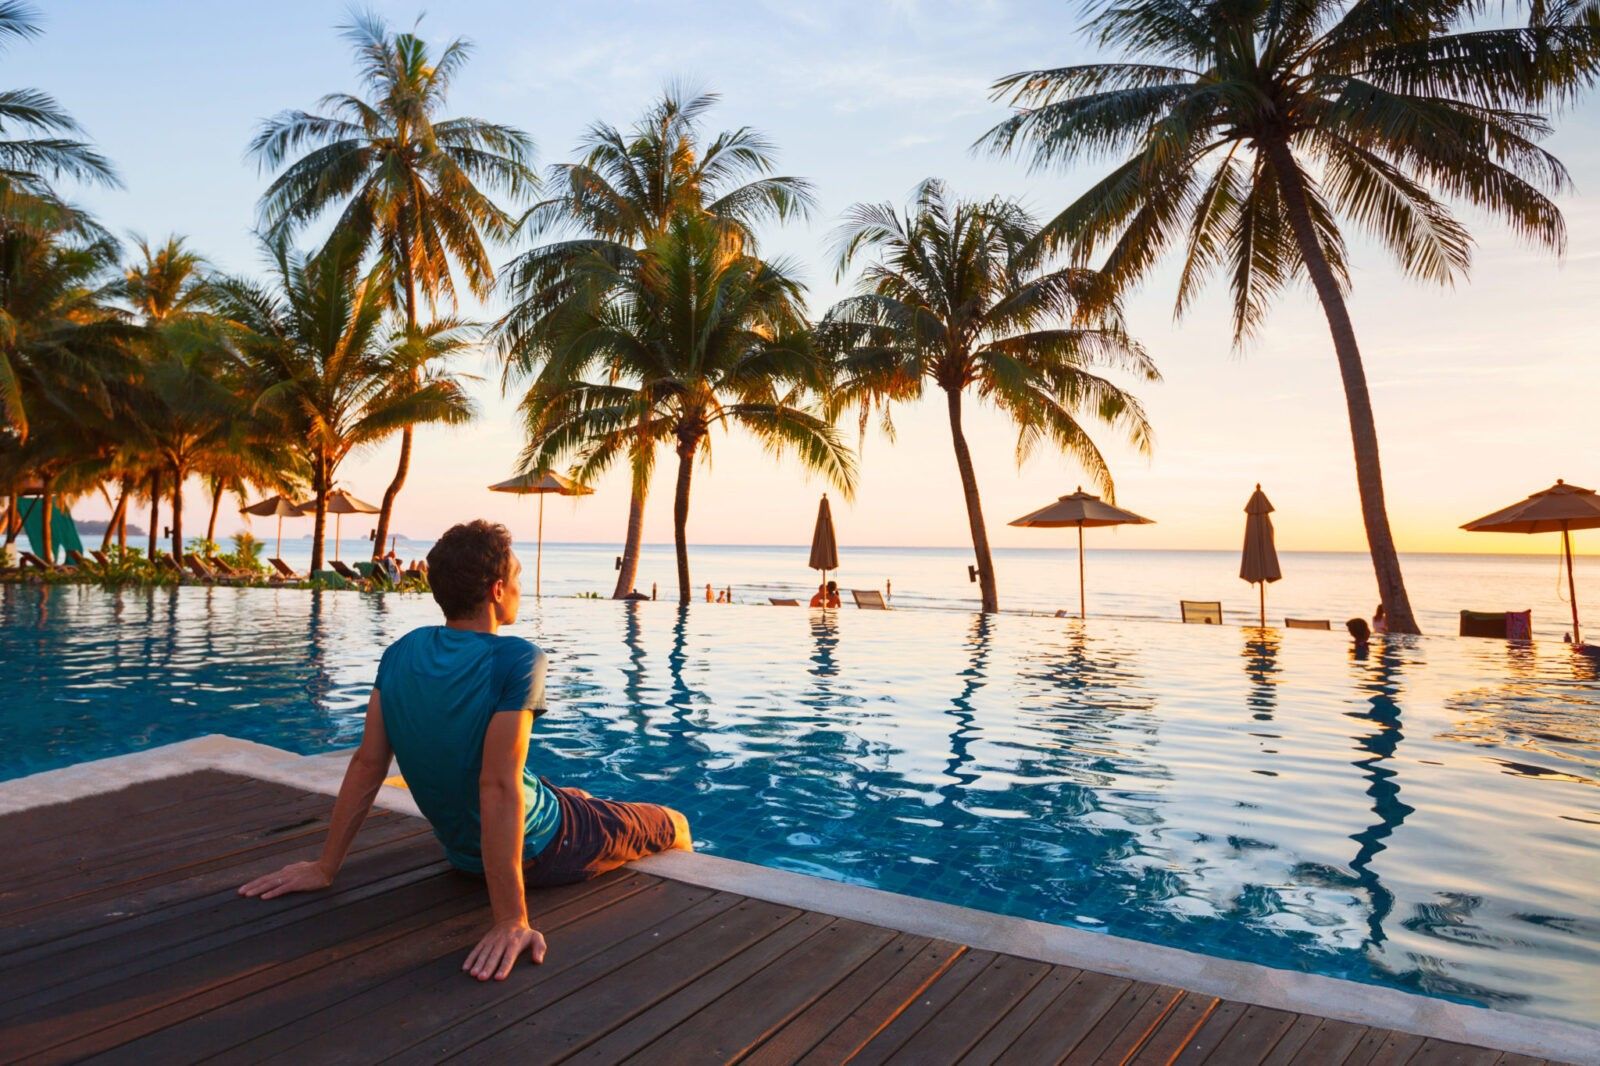 5 Easy Ways to Be More Mindful While on Vacation